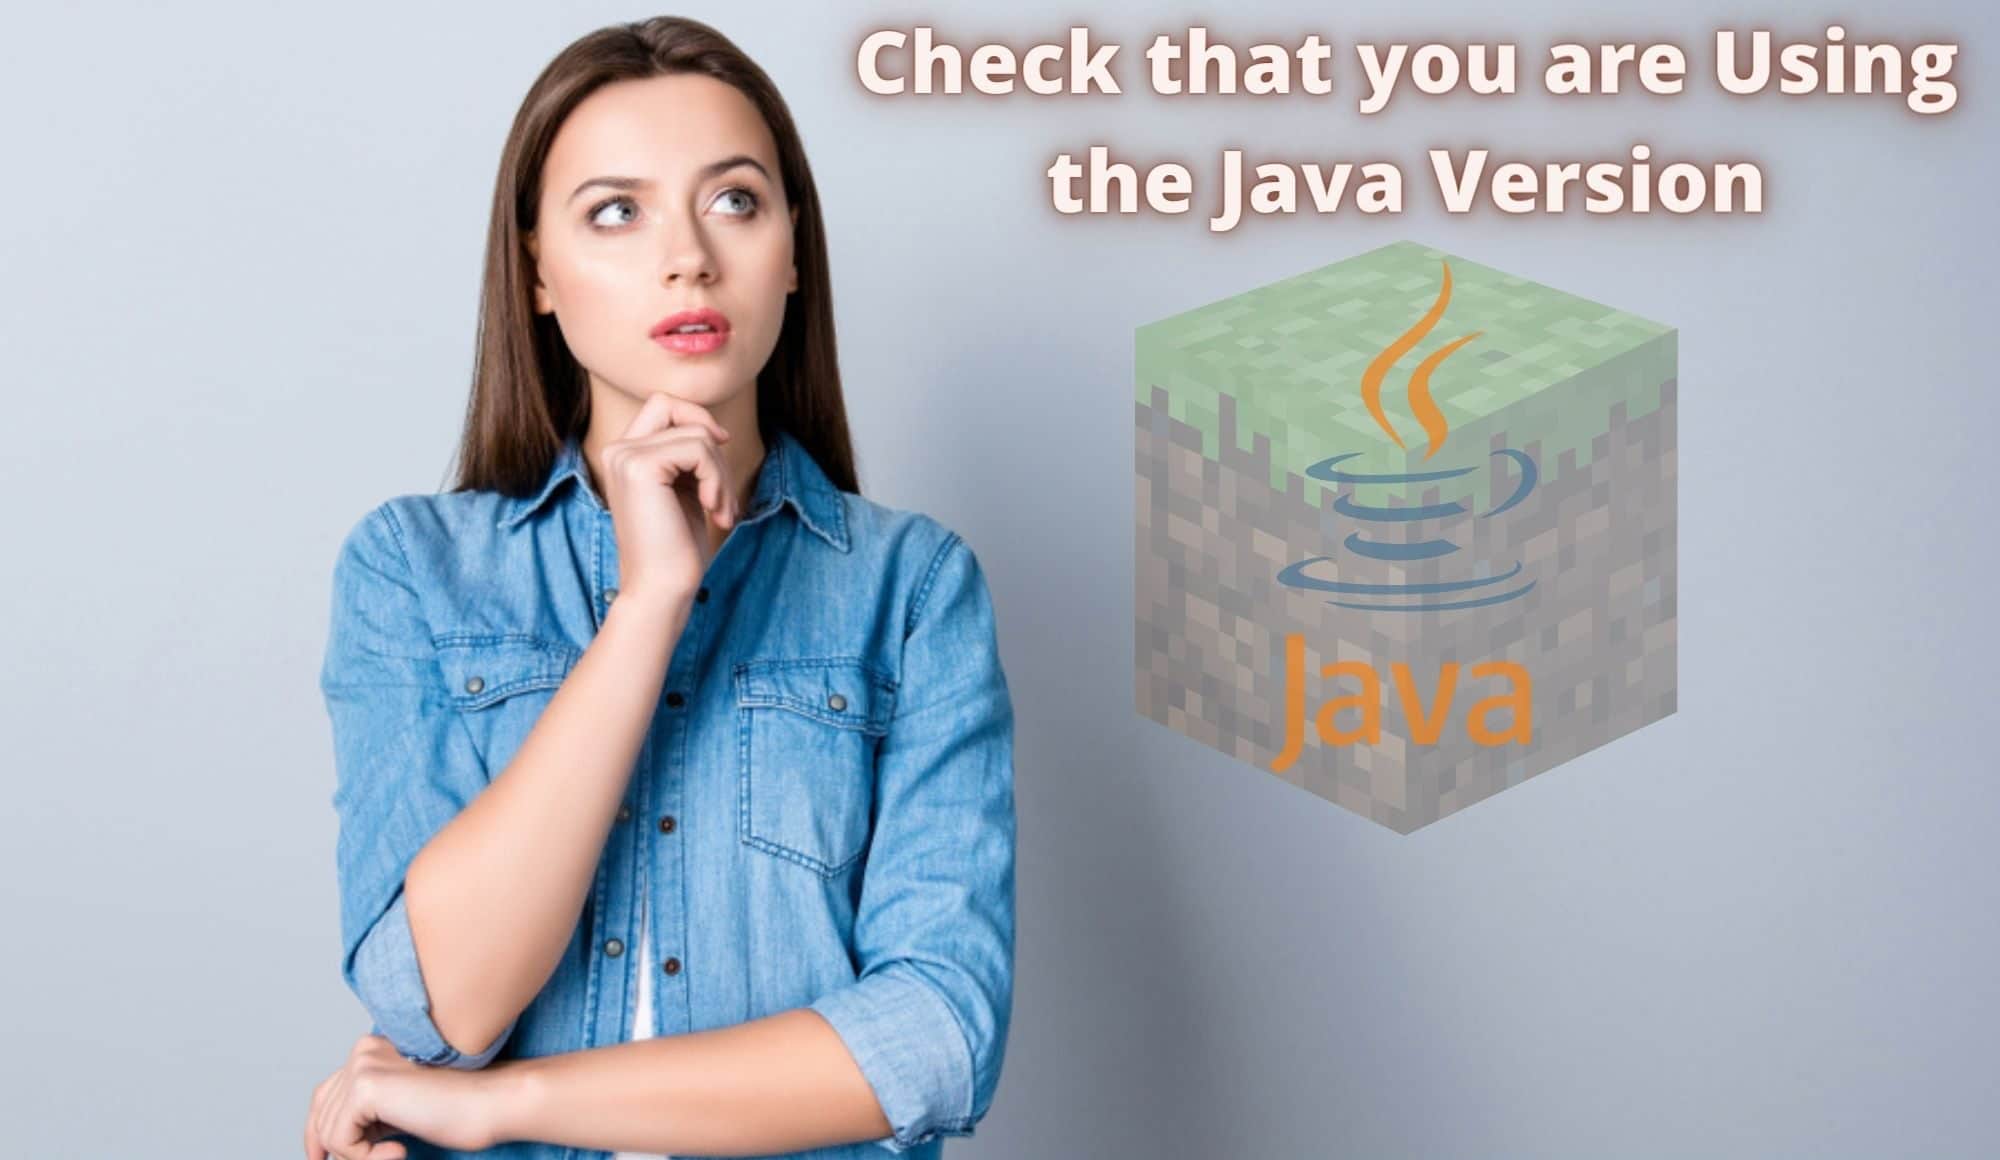 Check that you are Using the Java Version